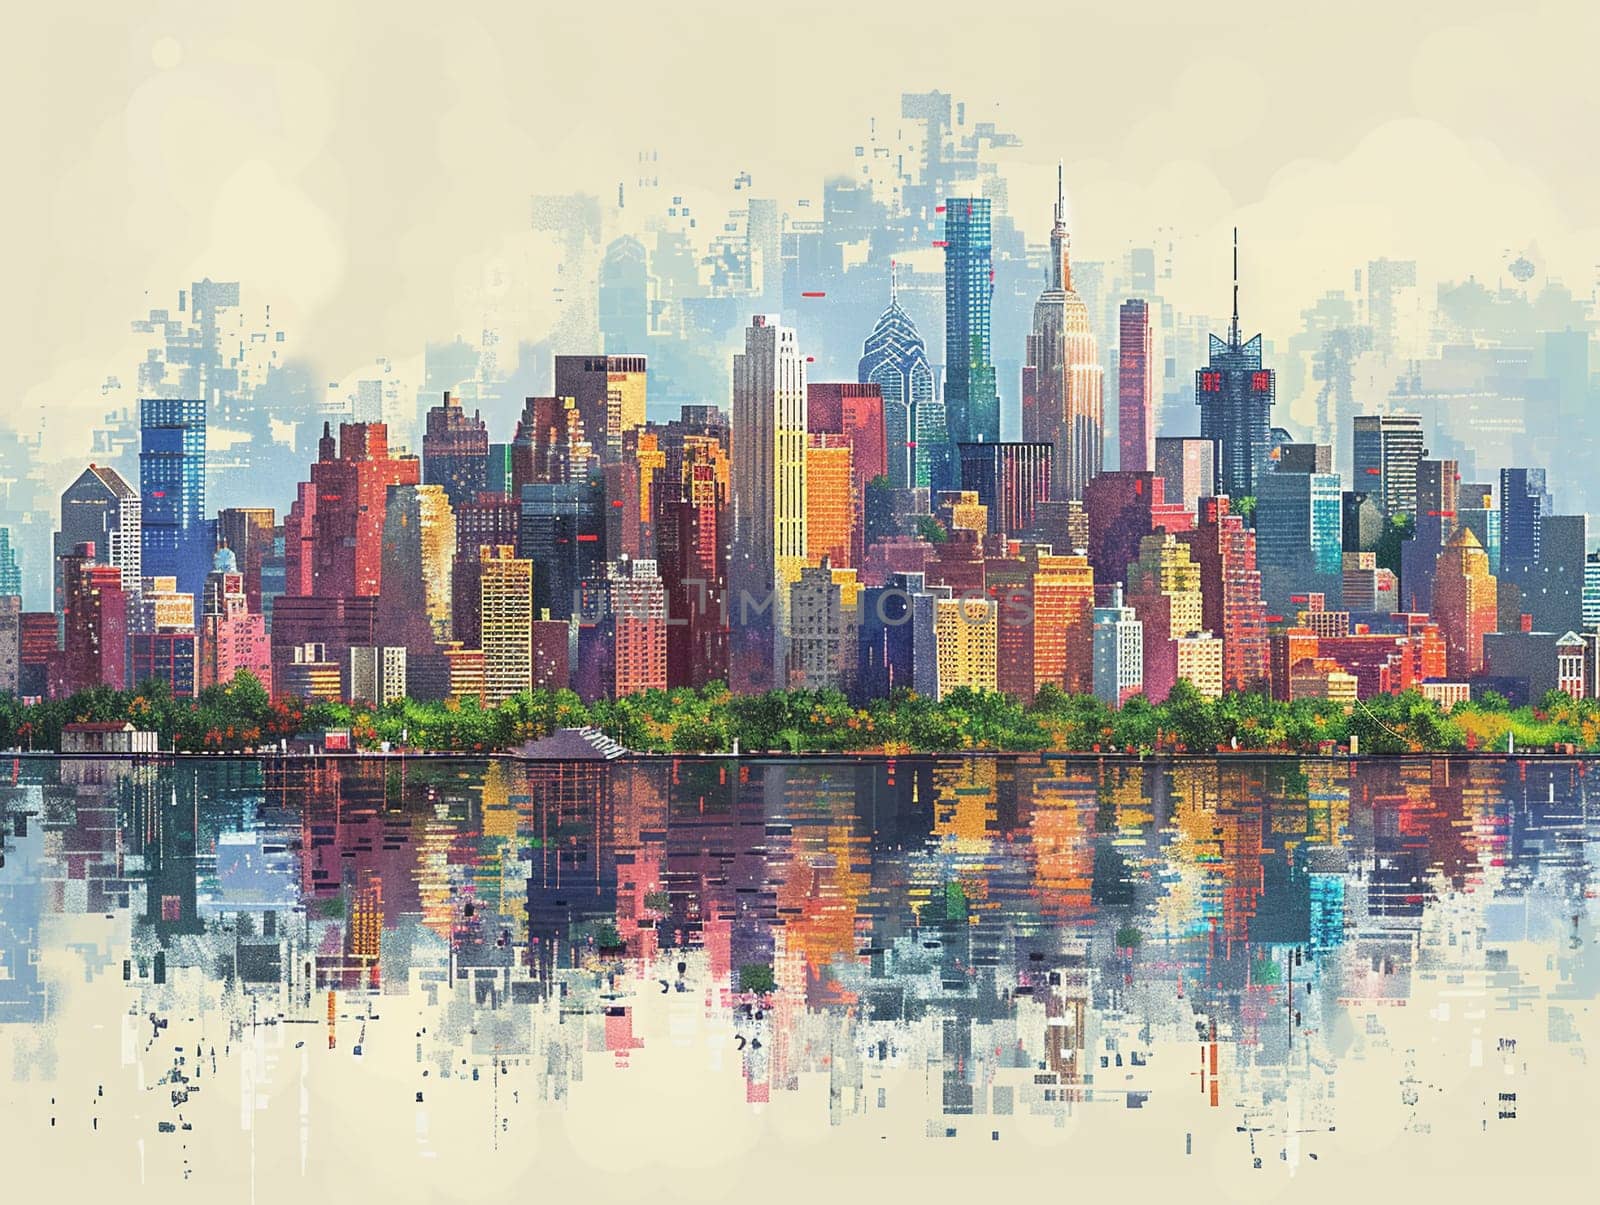 Pixelated Urban Skyline Evoking Retro Video Games, A cityscape rendered in blocky squares blurs the lines between modern skylines and digital art.